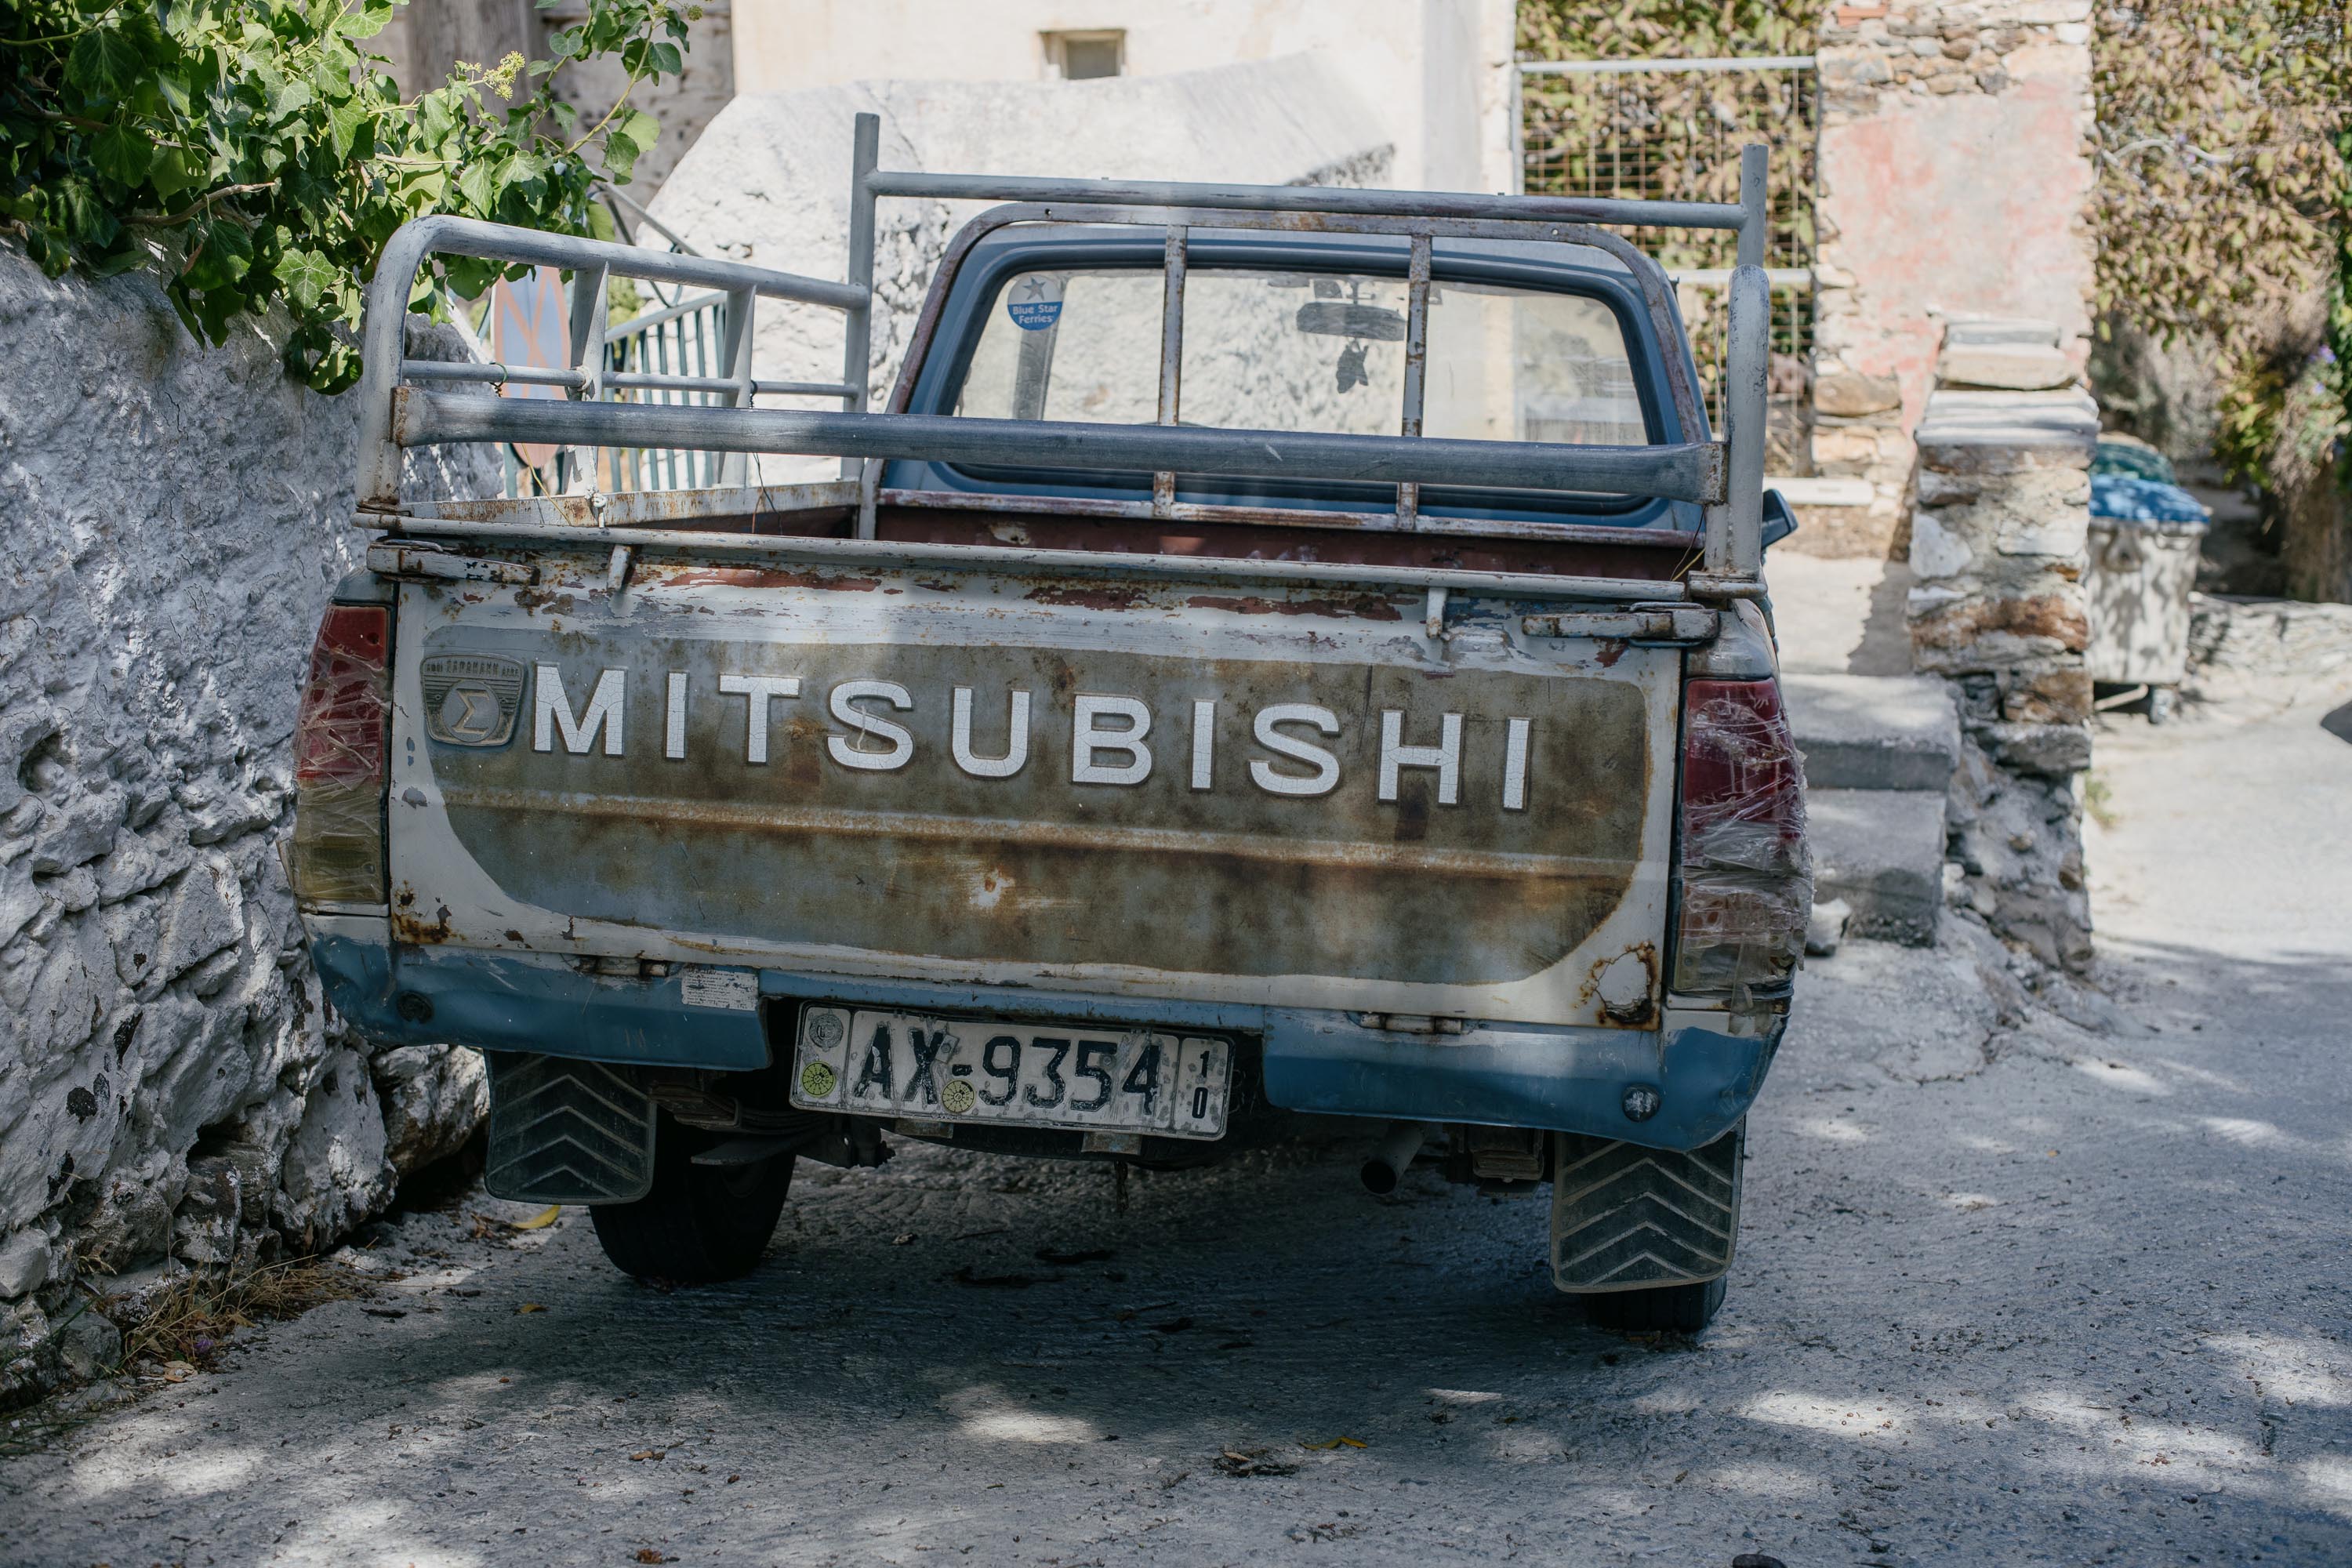 Even run-down Mitsubishi truck looks good with this lens